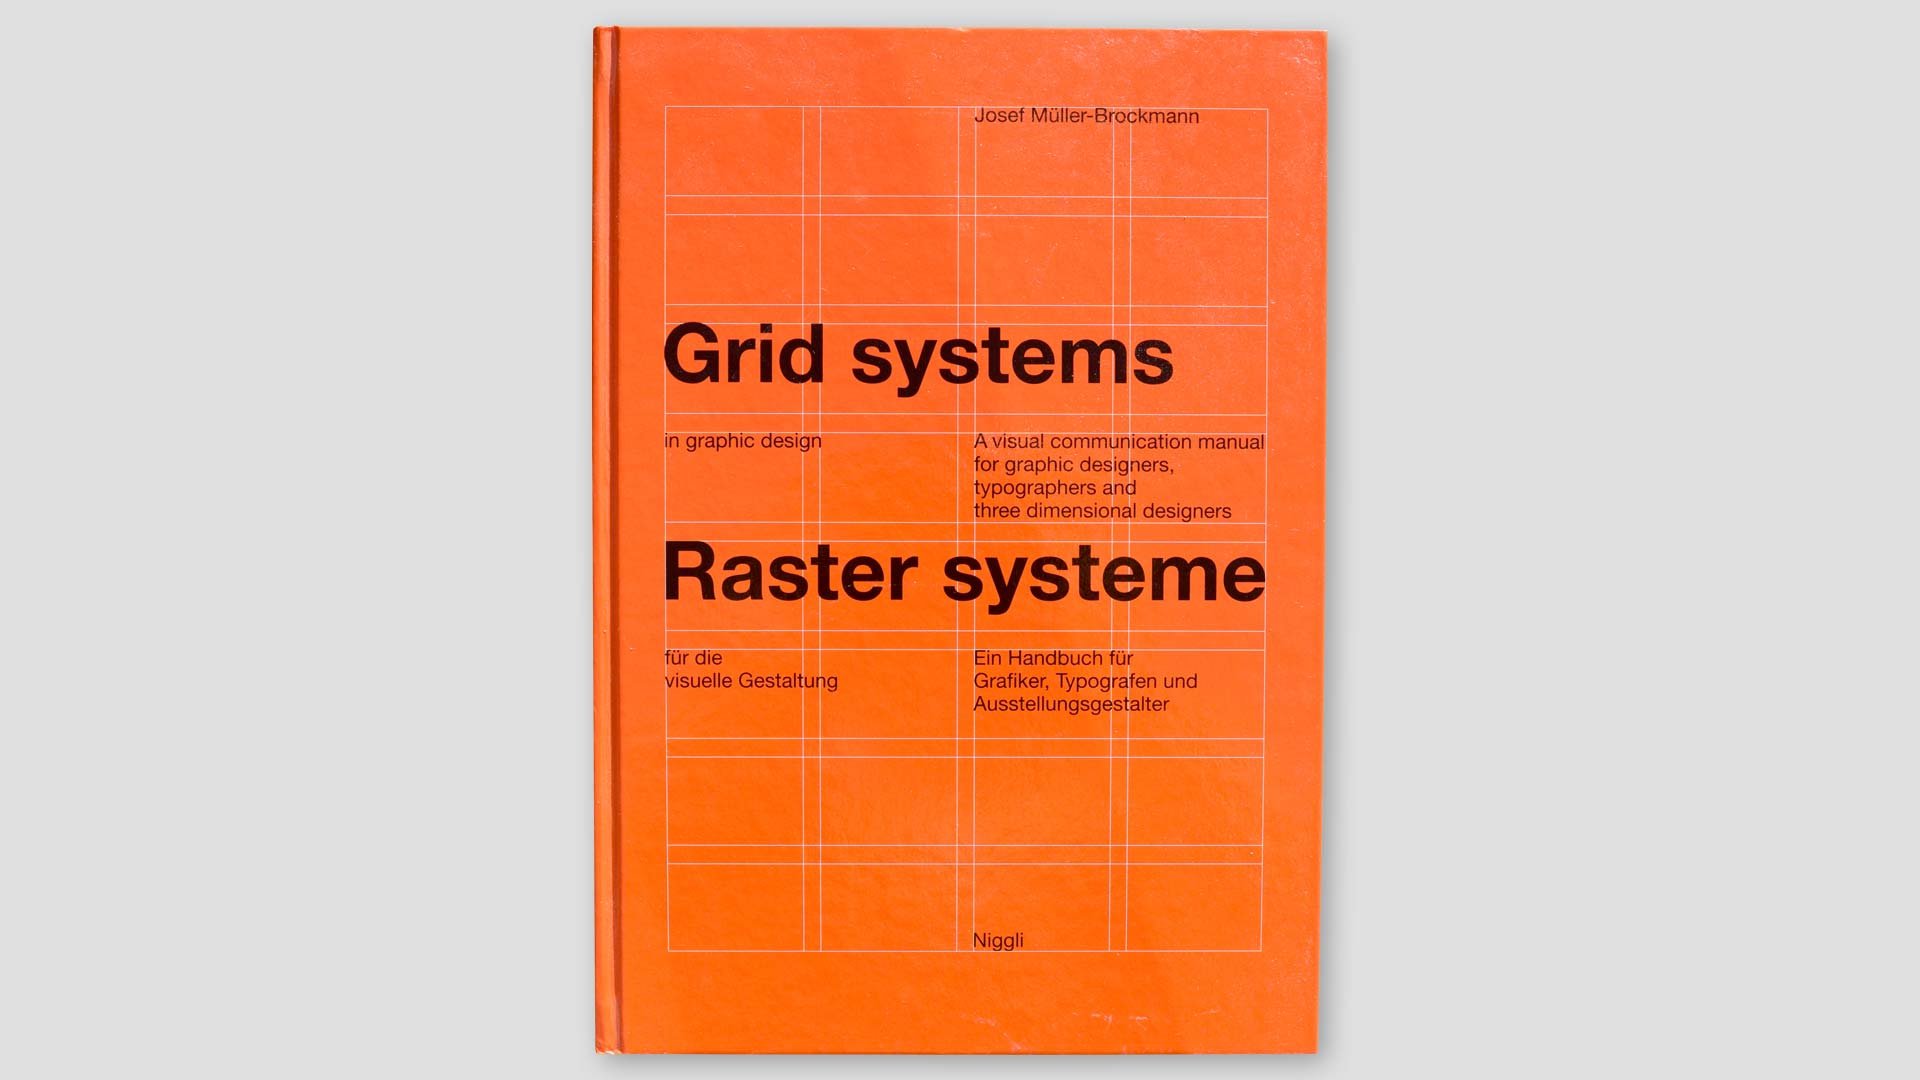 Grid Systems in Graphic Design by Josef Muller-Brockmann